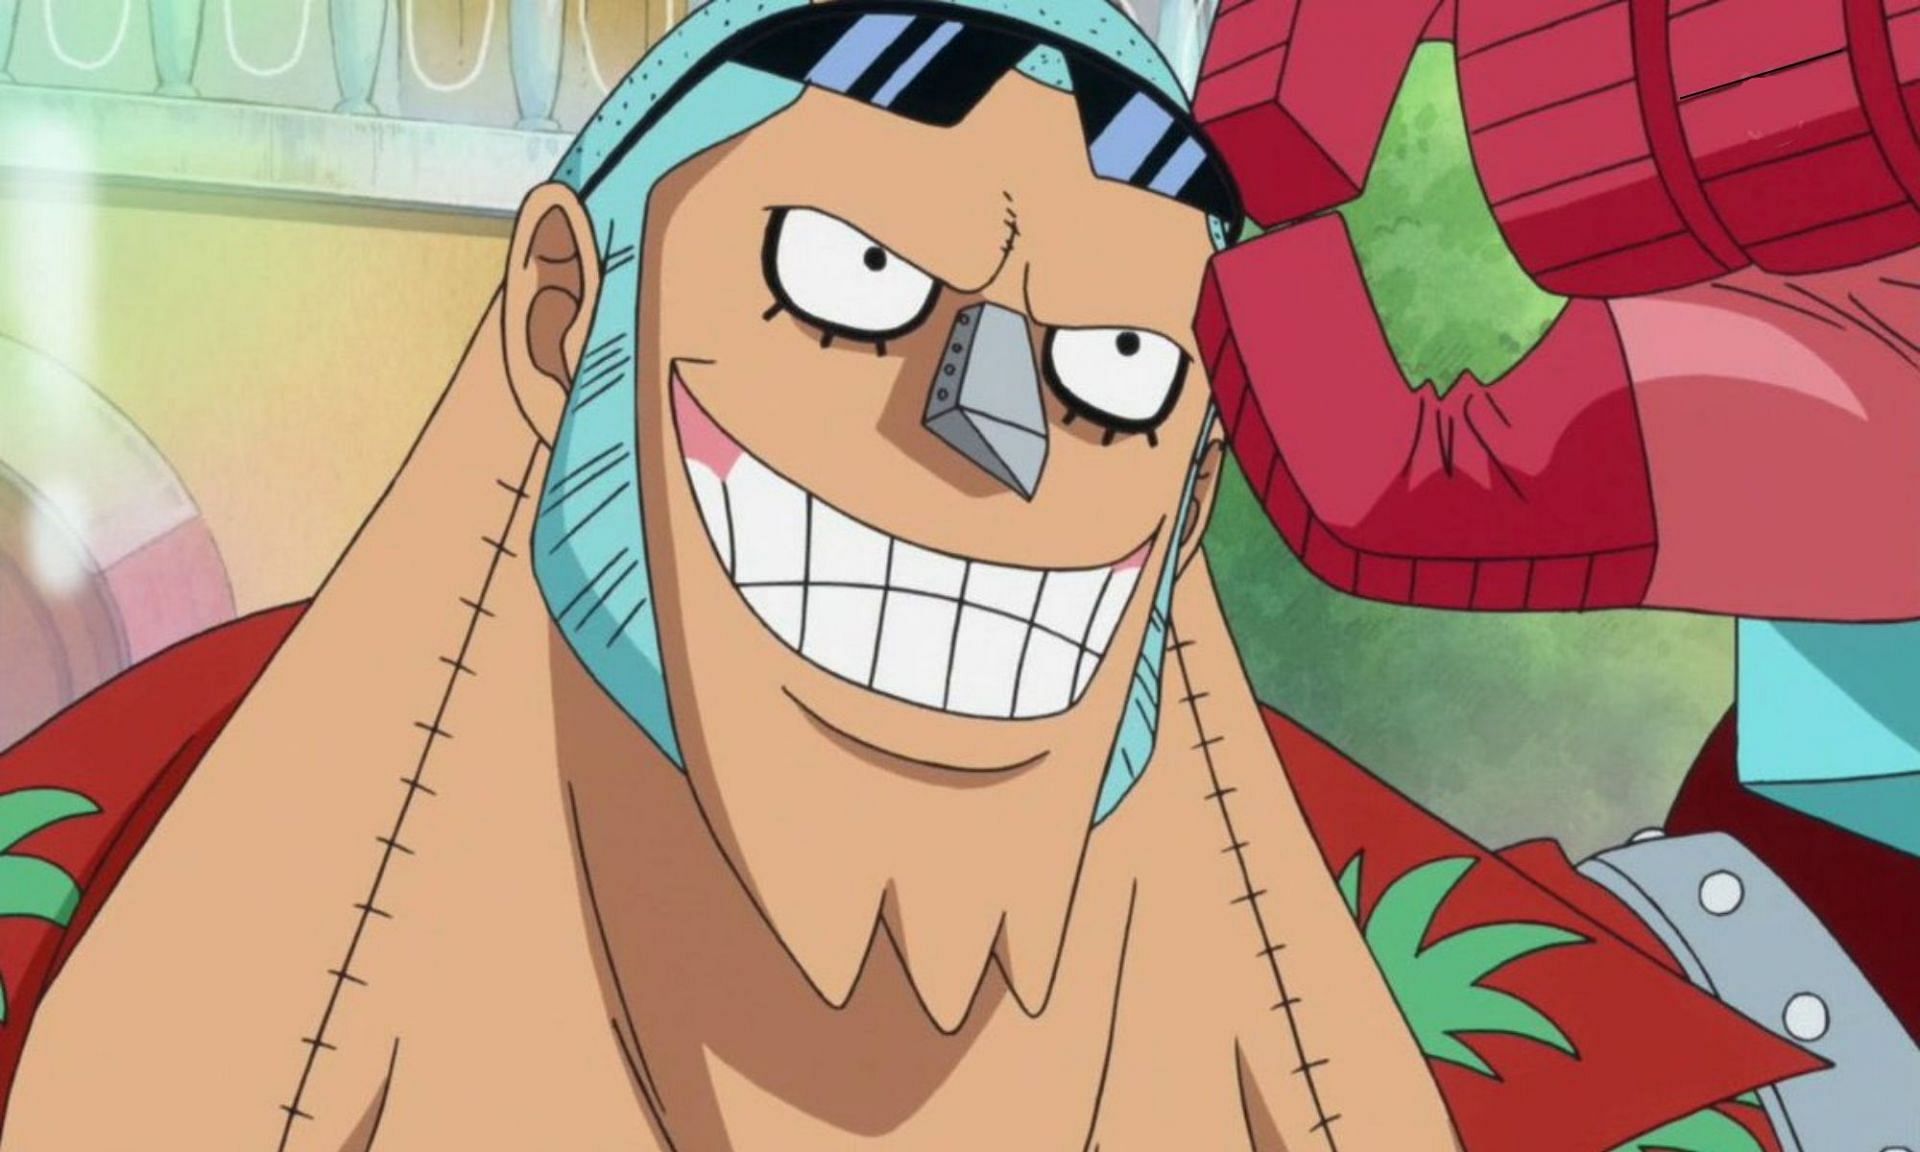 Franky might have a chance to shine in this arc